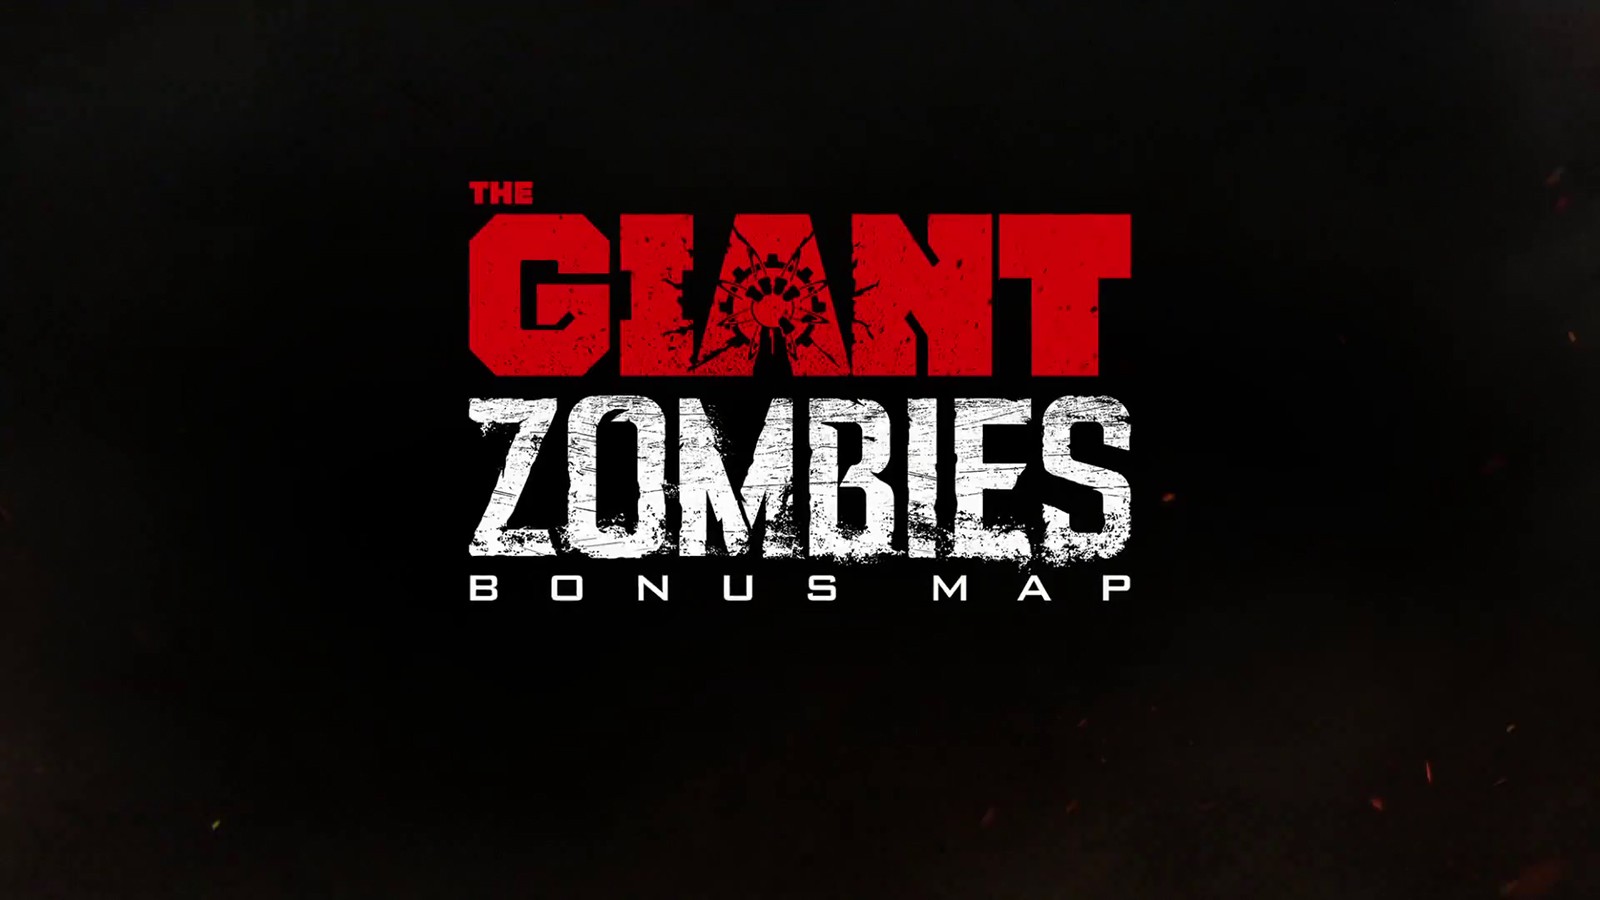 "THE GIANT" Font Name?